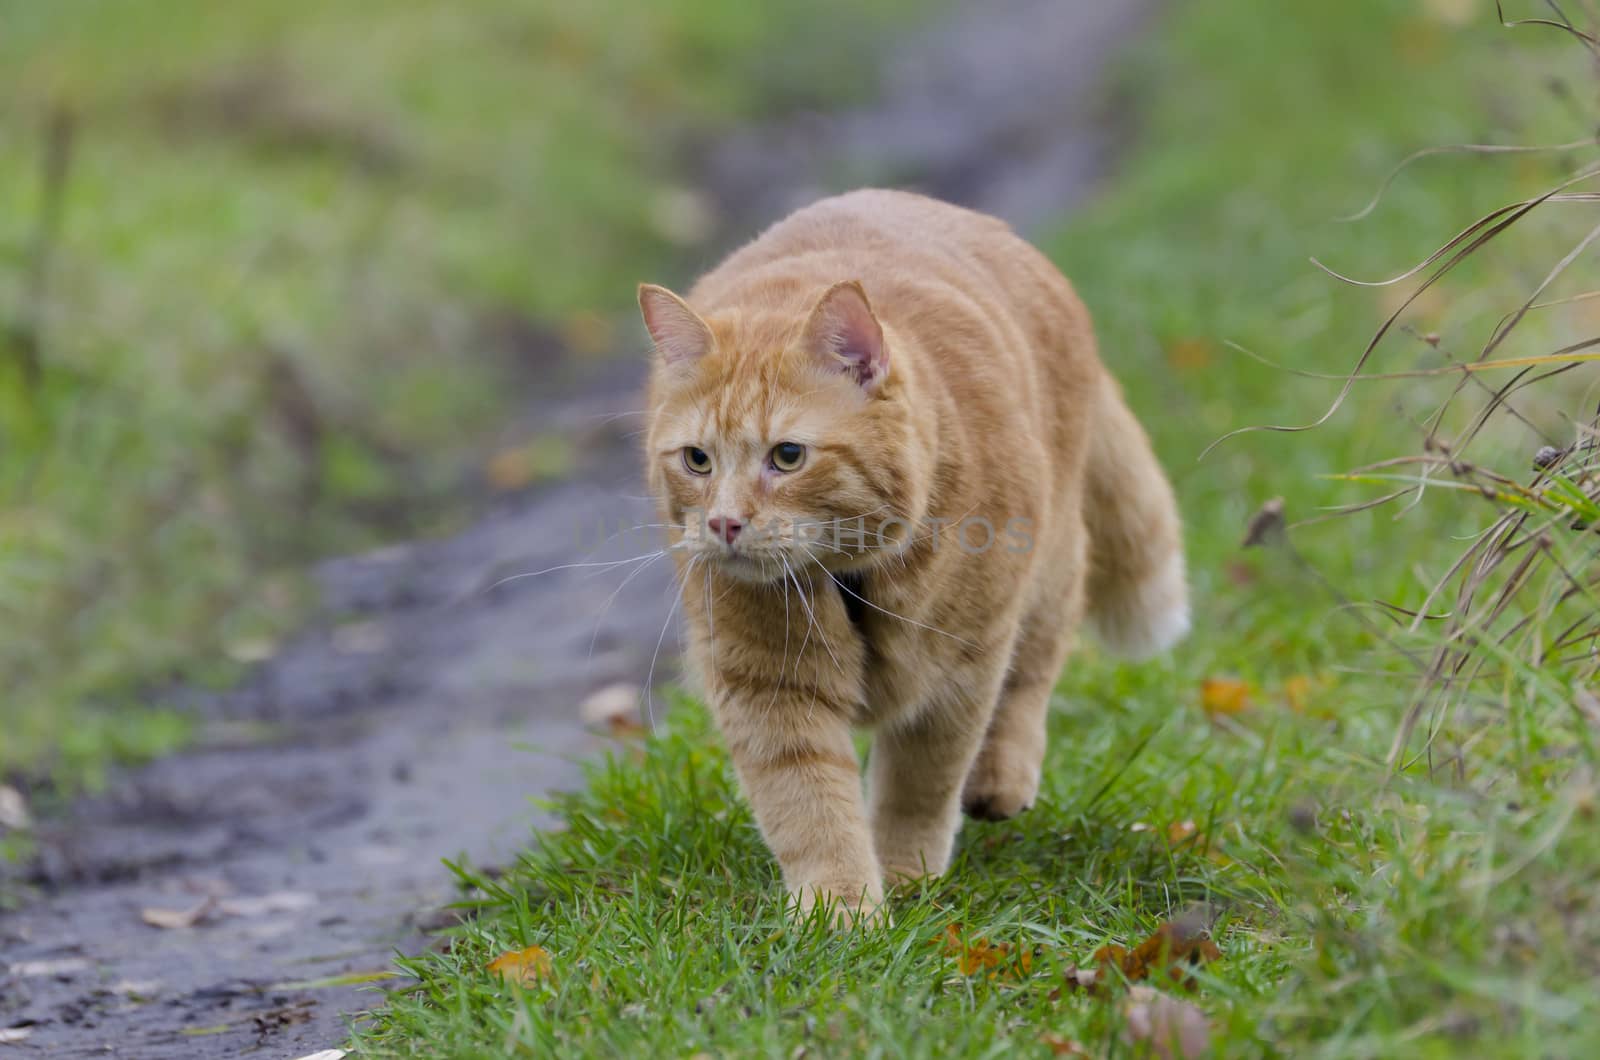 Red cat walks through the meadow with green grass and fallen leaves